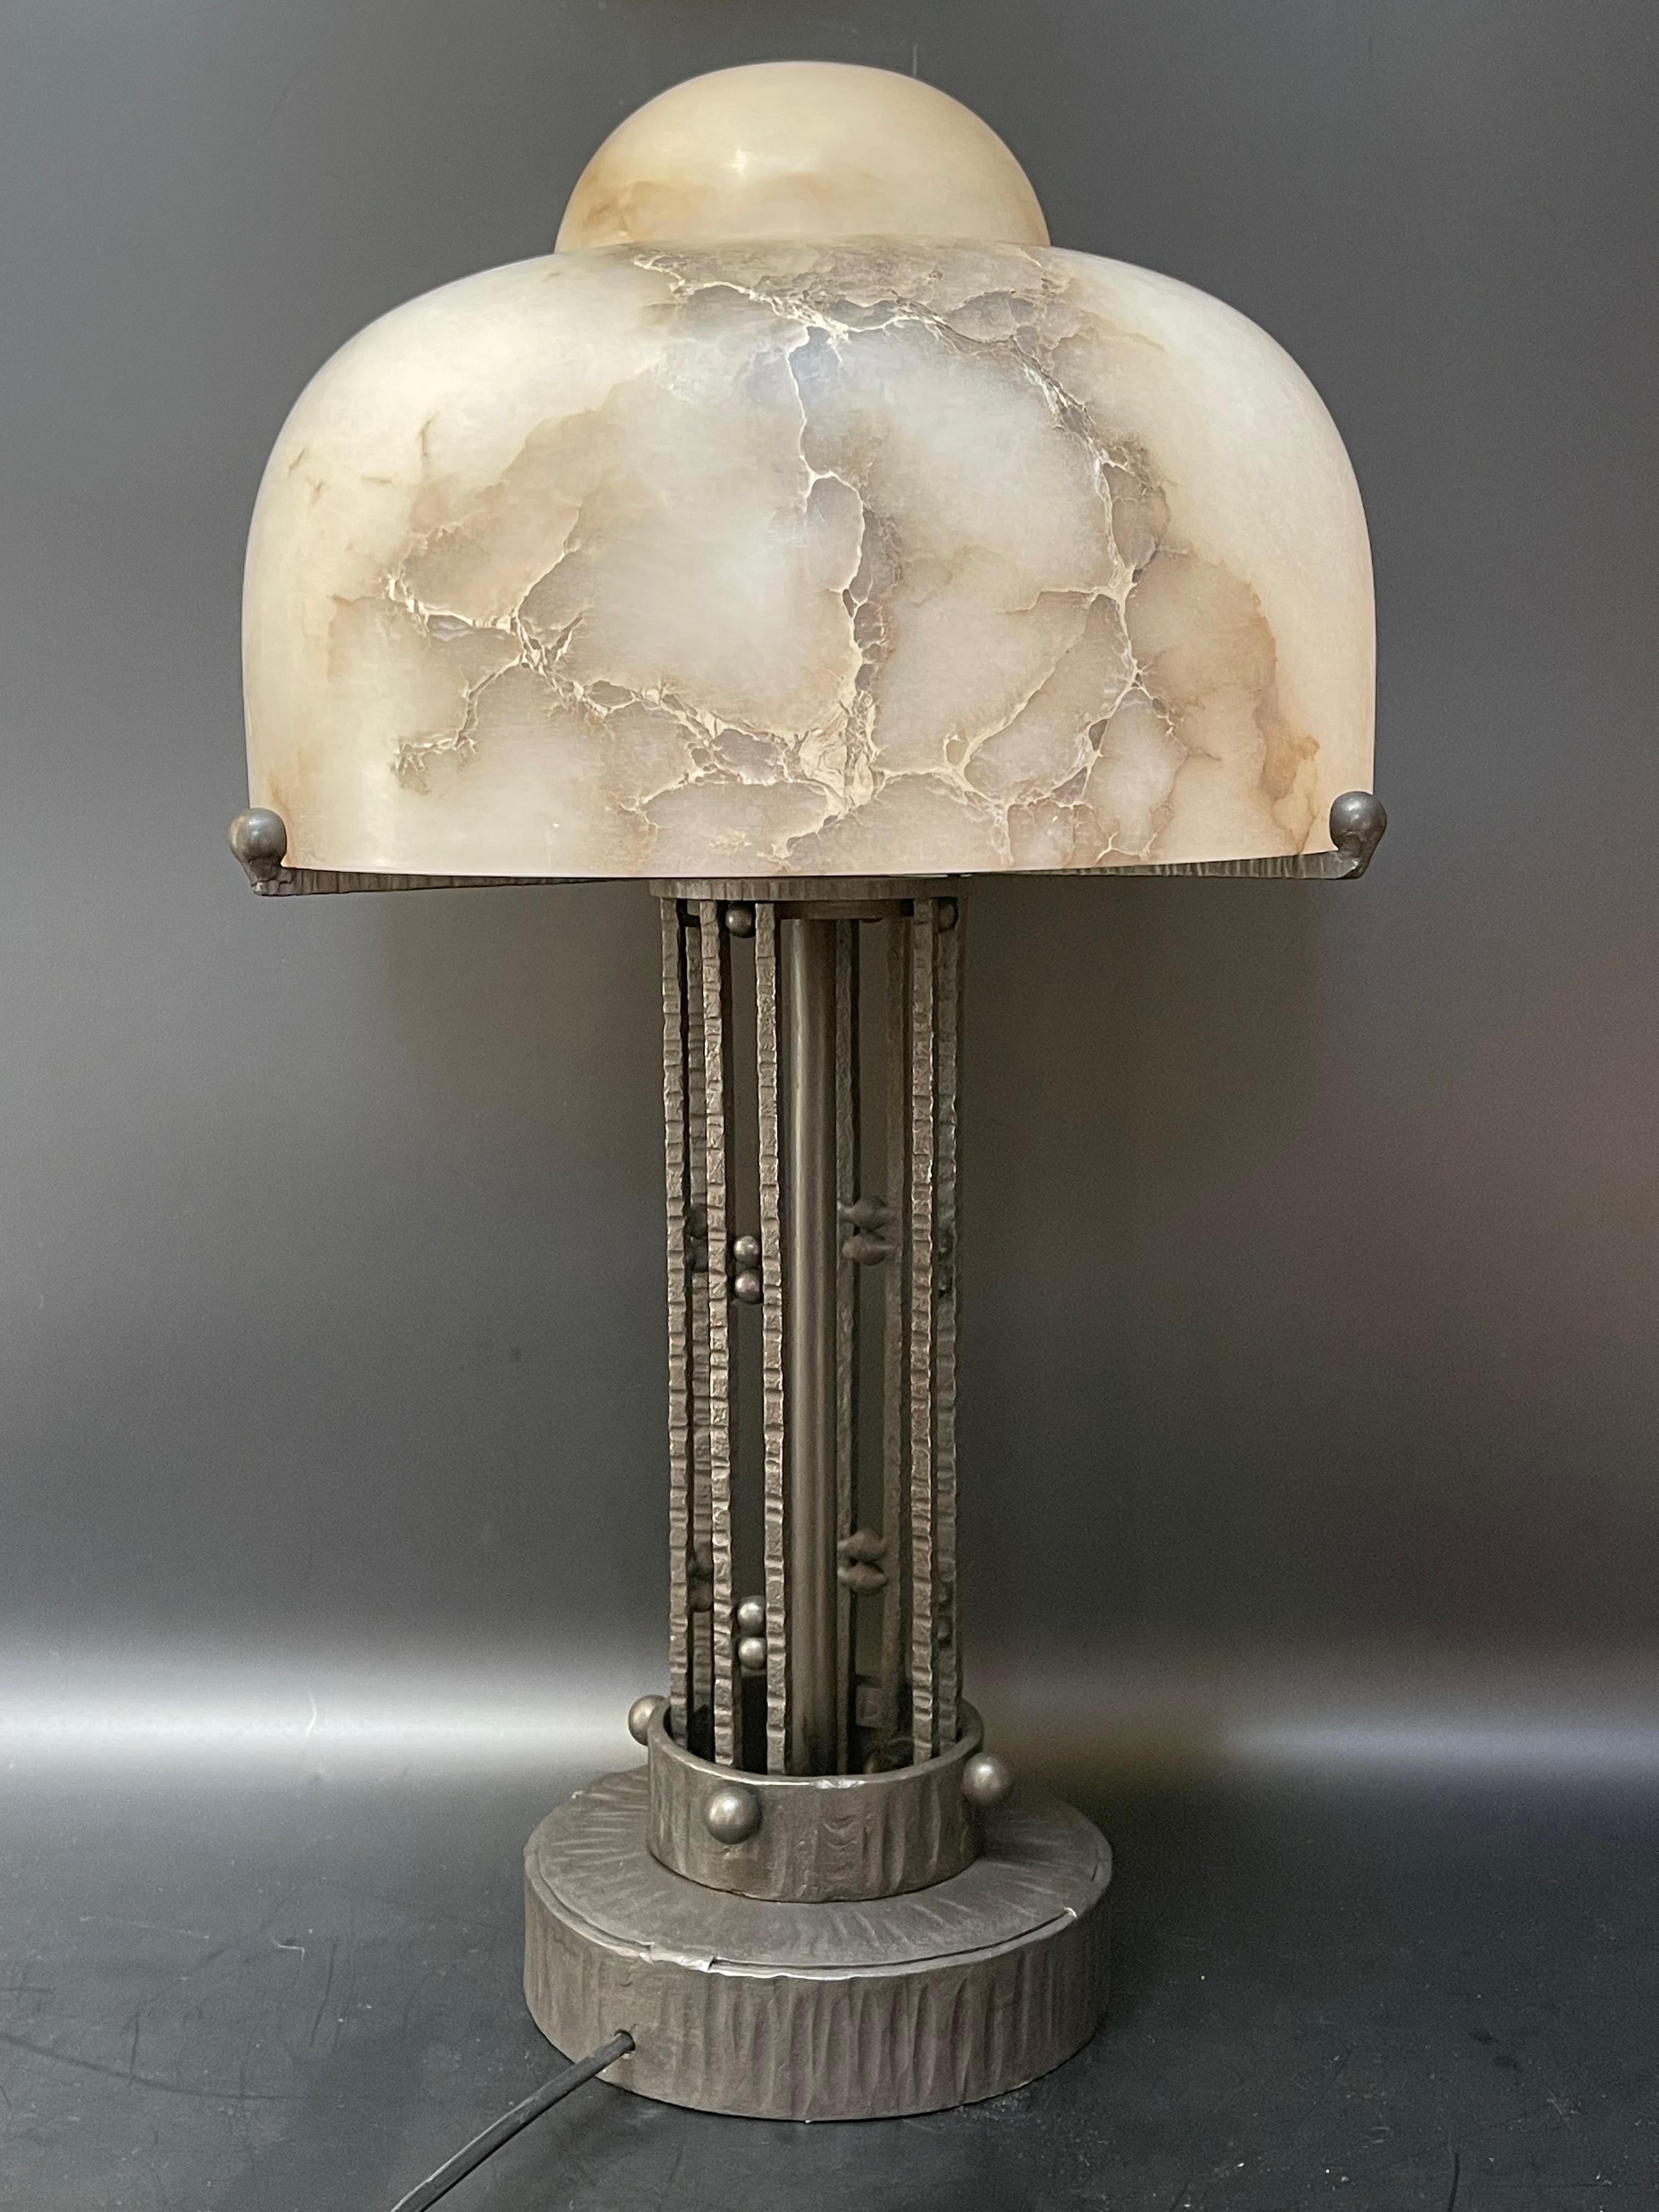 Large Art Deco lamp around 1930.
Alabaster shell and wrought iron foot.
In very good condition and electrified.

Diameter: 30 cm (obus) 
Diameter: 17 cm (base)
Height: 53 cm.